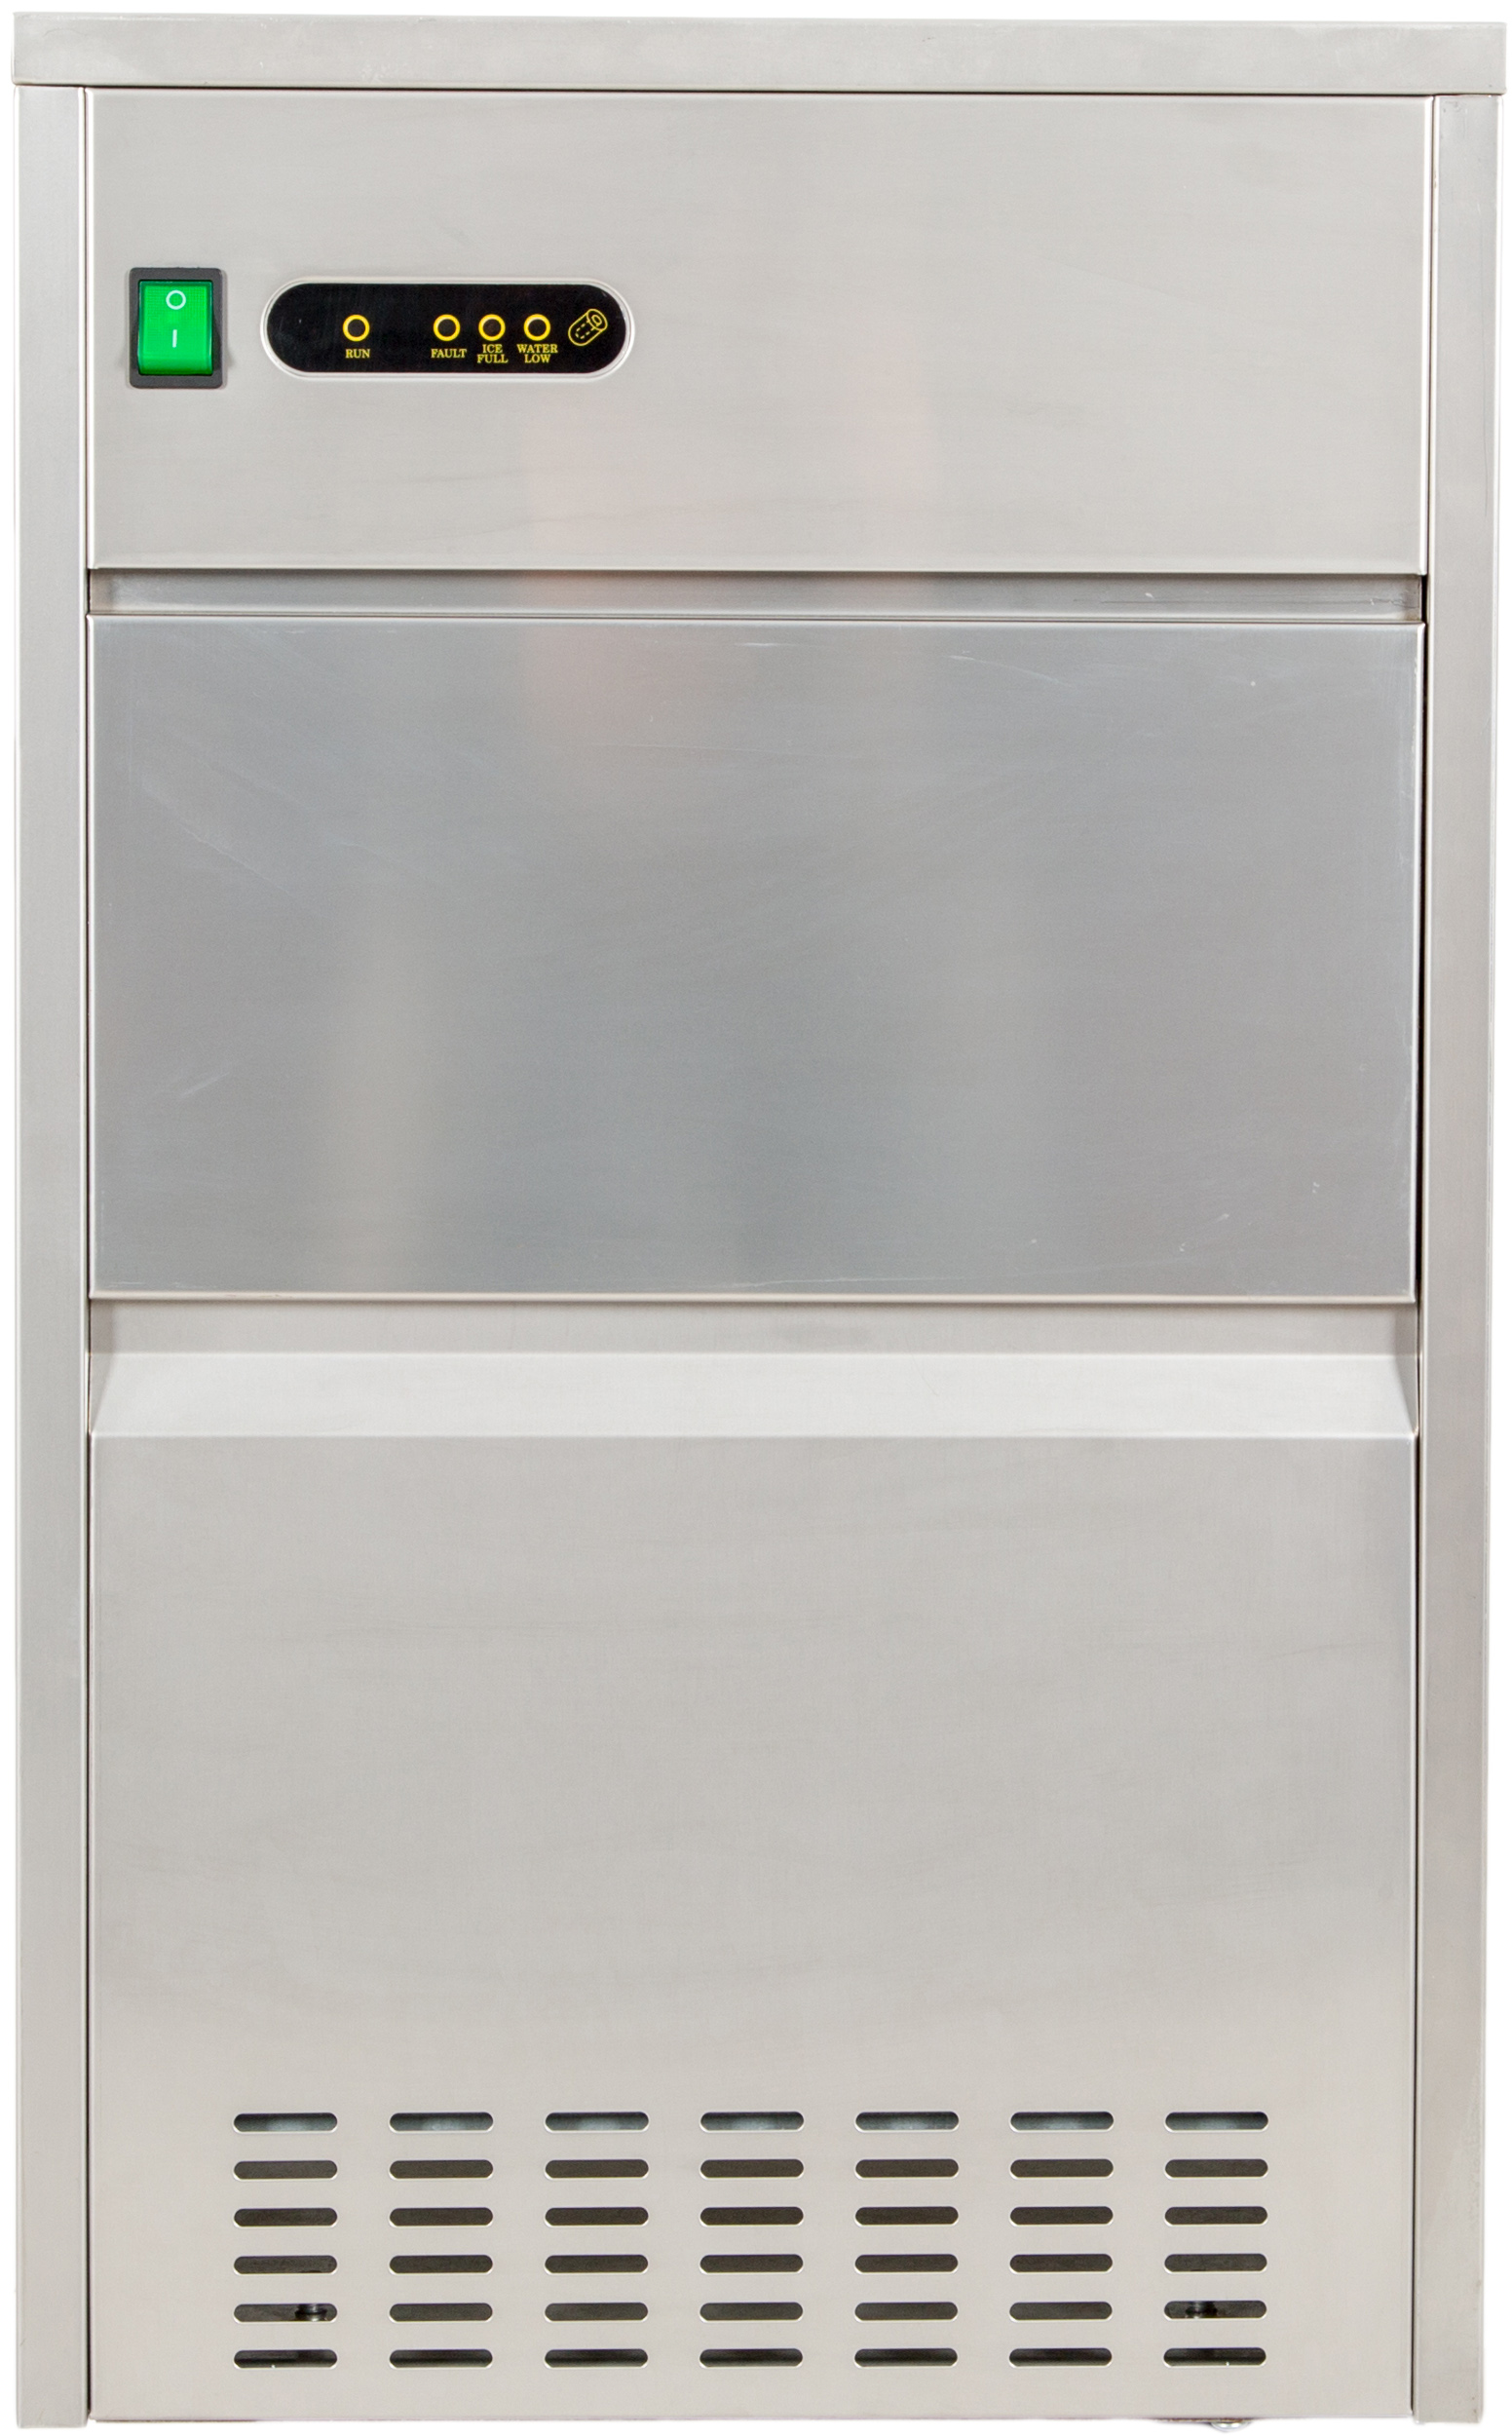 GRT-ZB50 50kg New Style stainless steel commercial ice maker